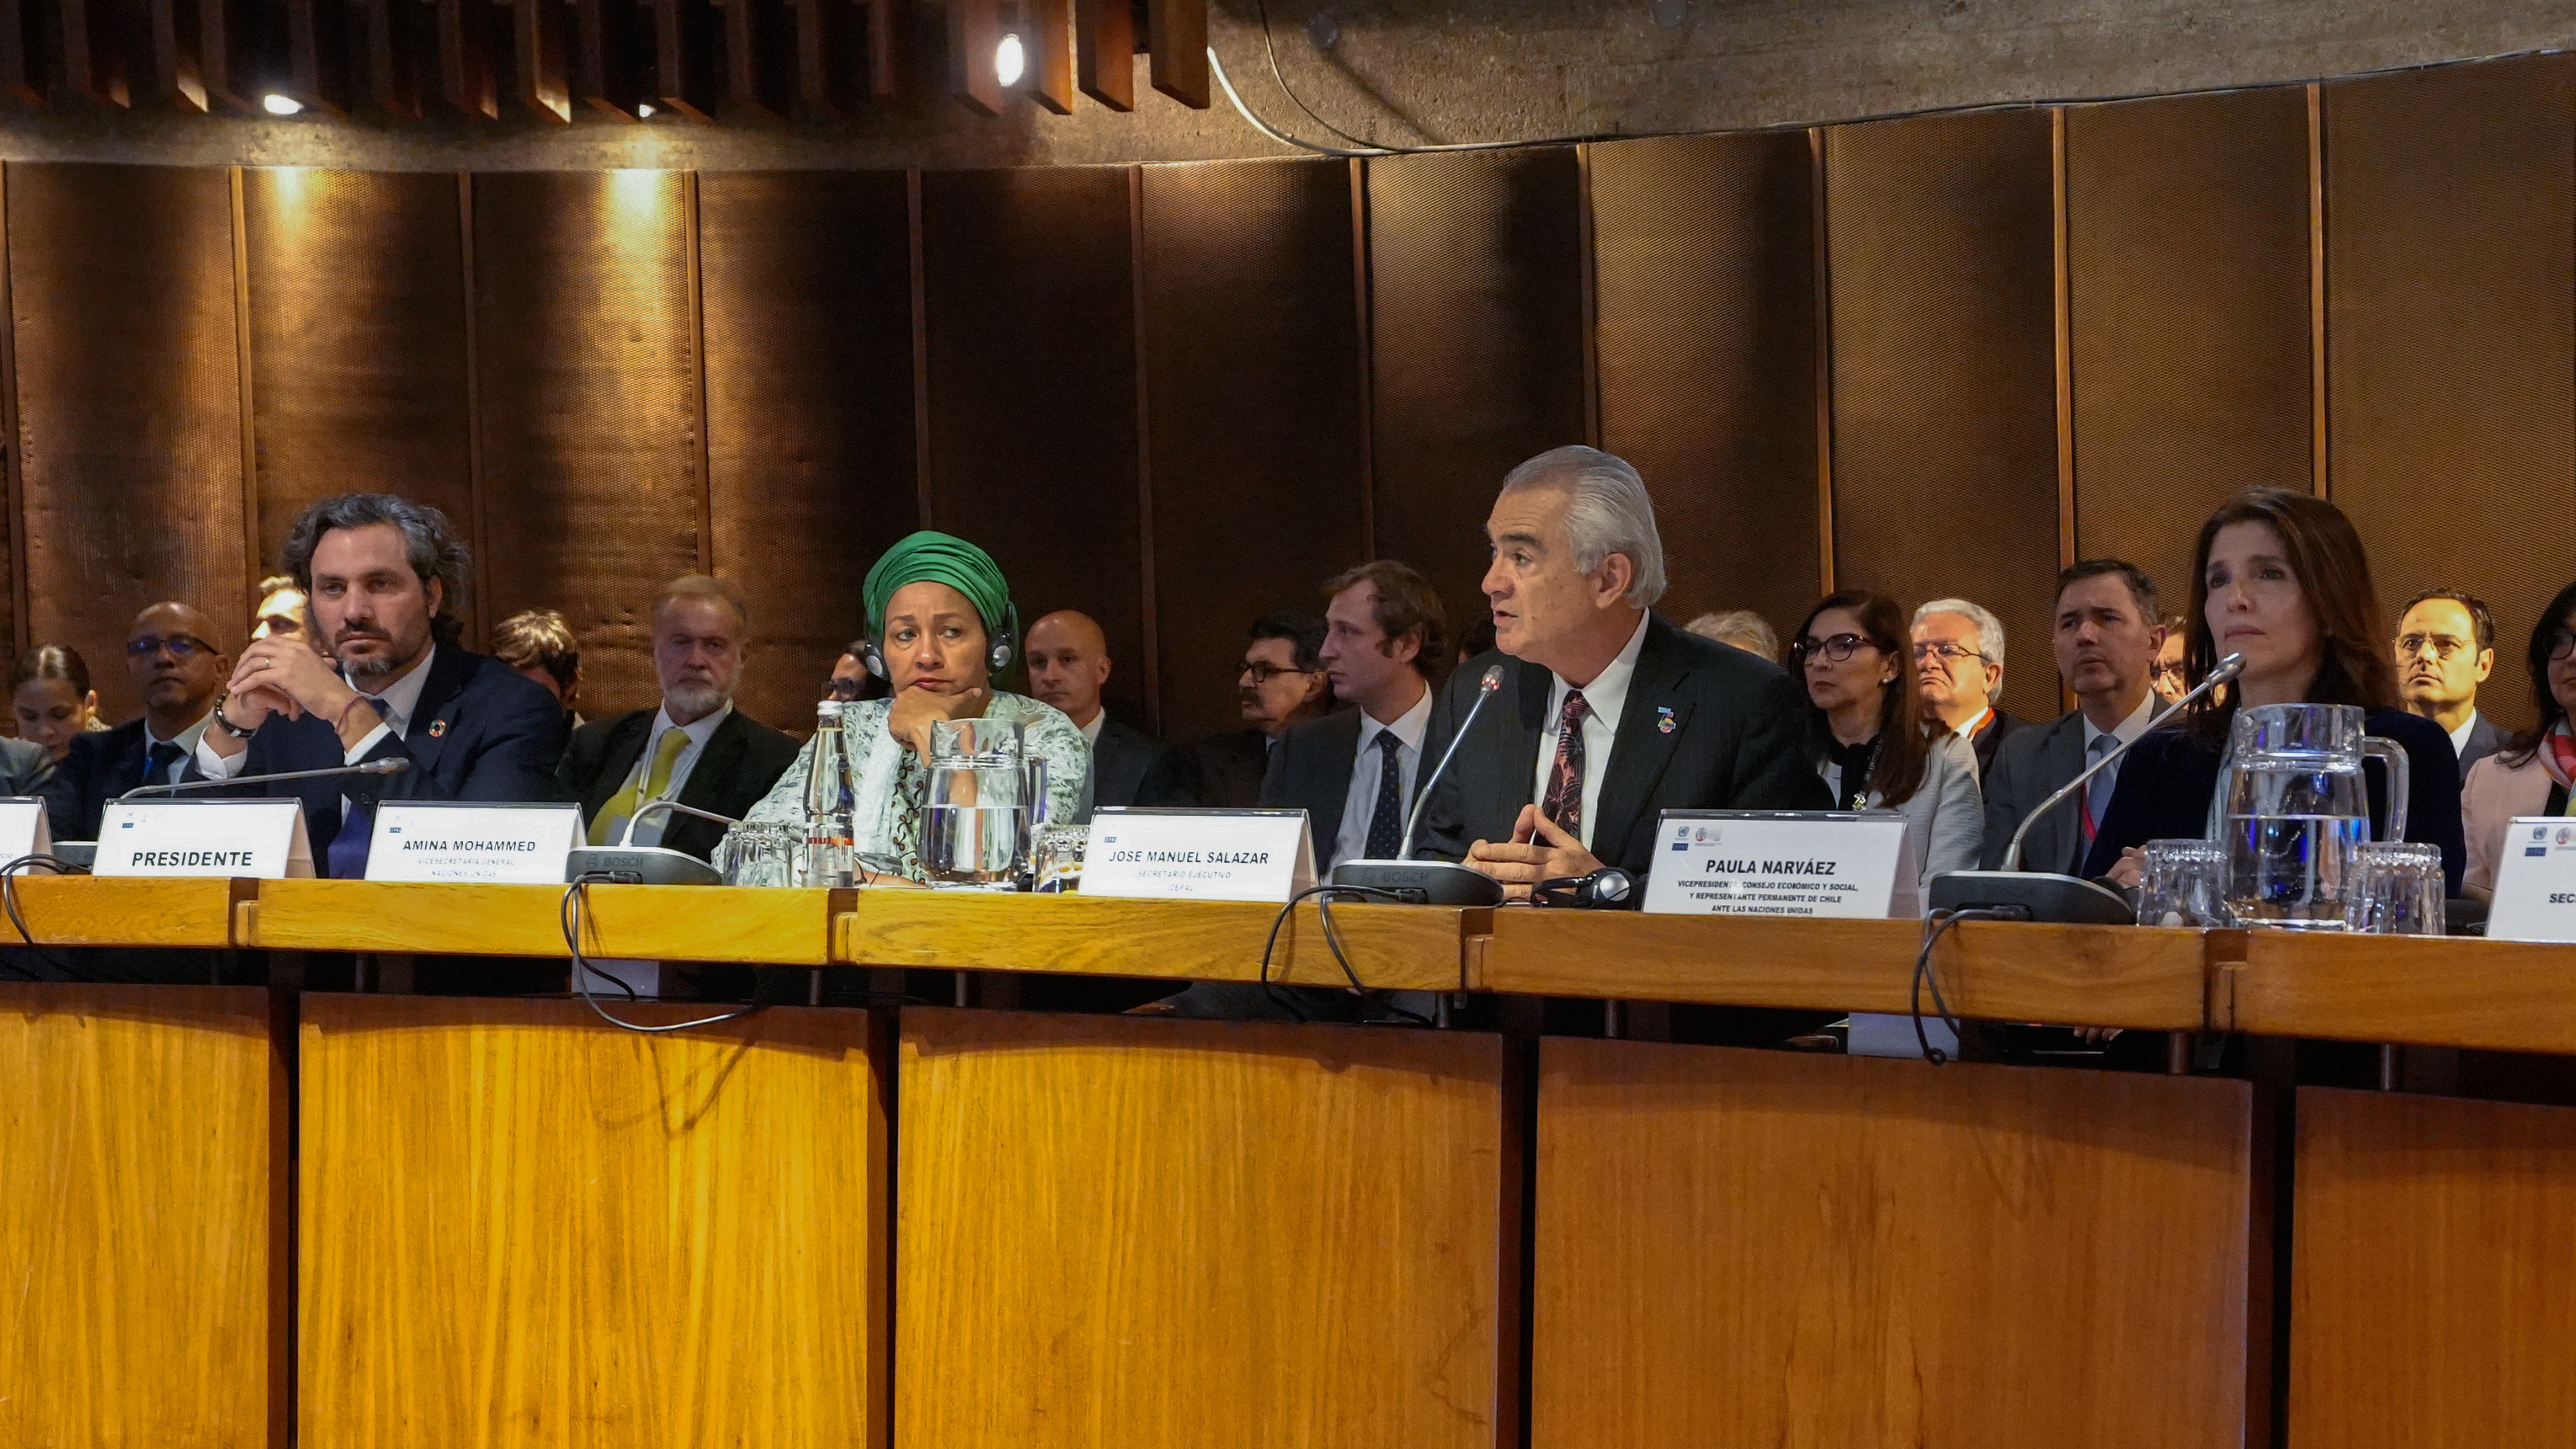 From left to right: Santiago Cafiero, Foreign Minister of Argentina; Amina Mohammed, Deputy Secretary-General of the United Nations; José Manuel Salazar-Xirinachs, Executive Secretary of ECLAC; and Paula Narváez, Vice President of the UNECOSOC.